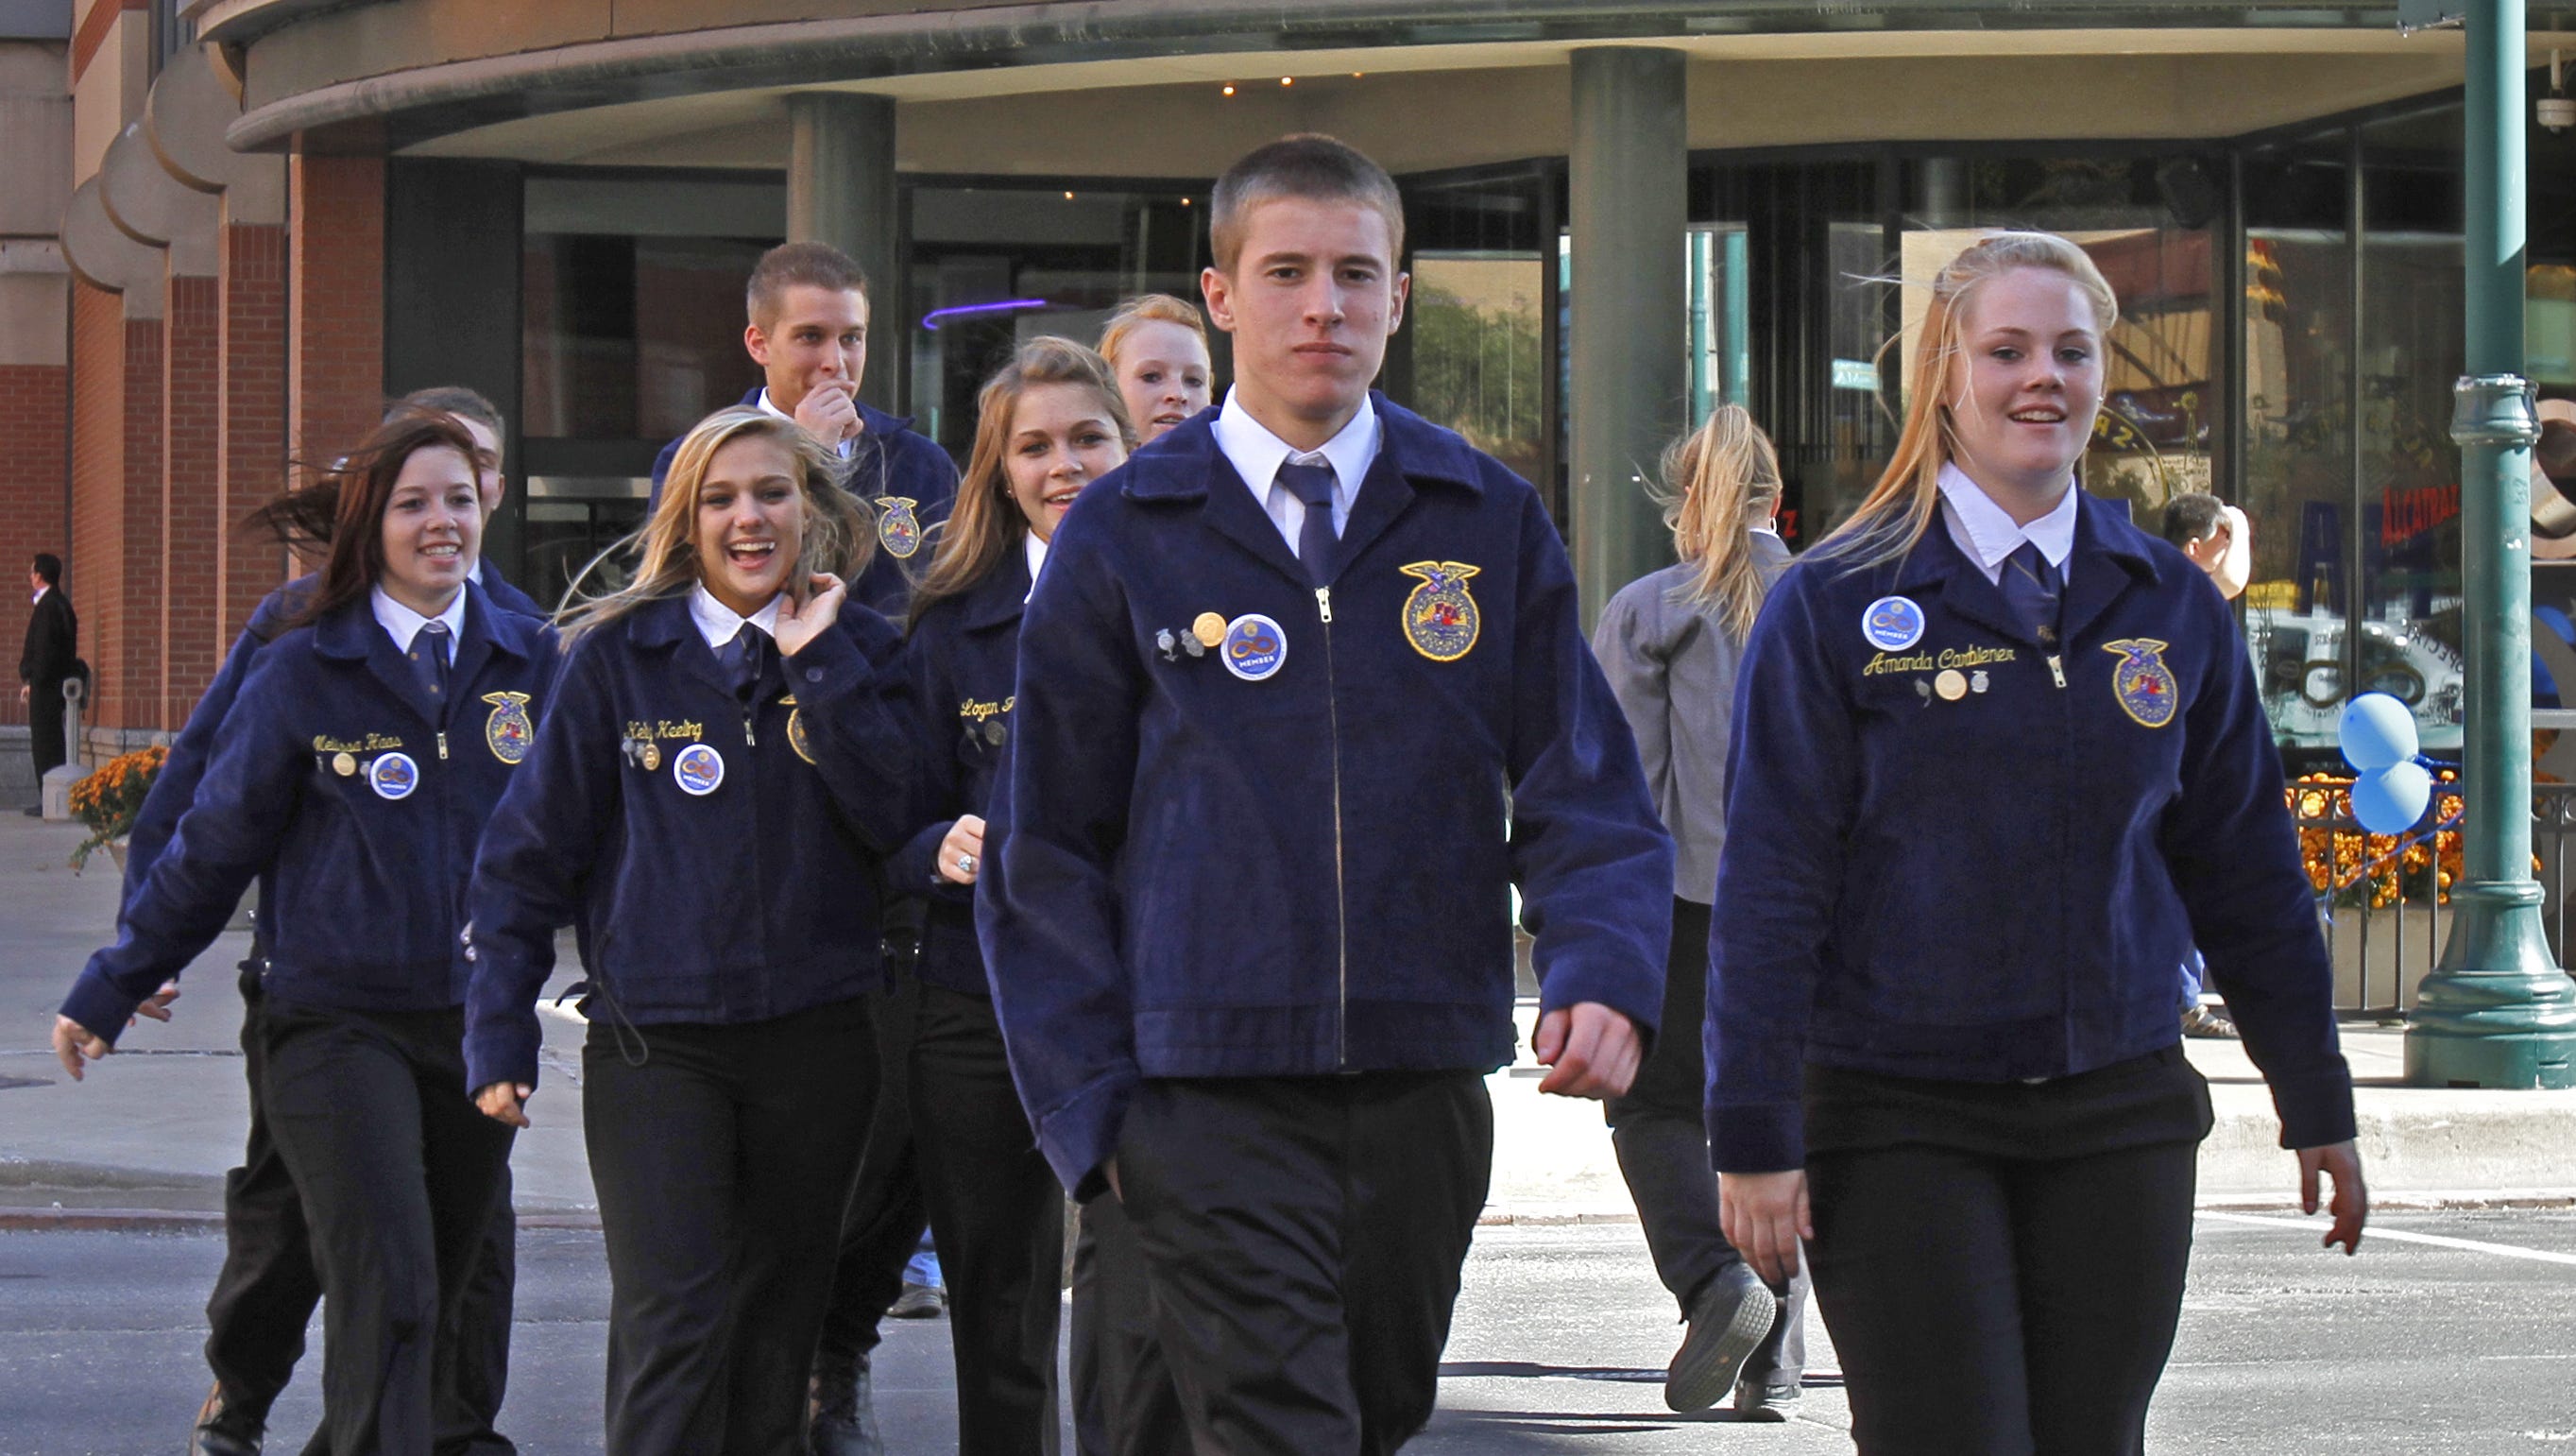 FFA convention returns to Indy next week and will bring 64,000 visitors